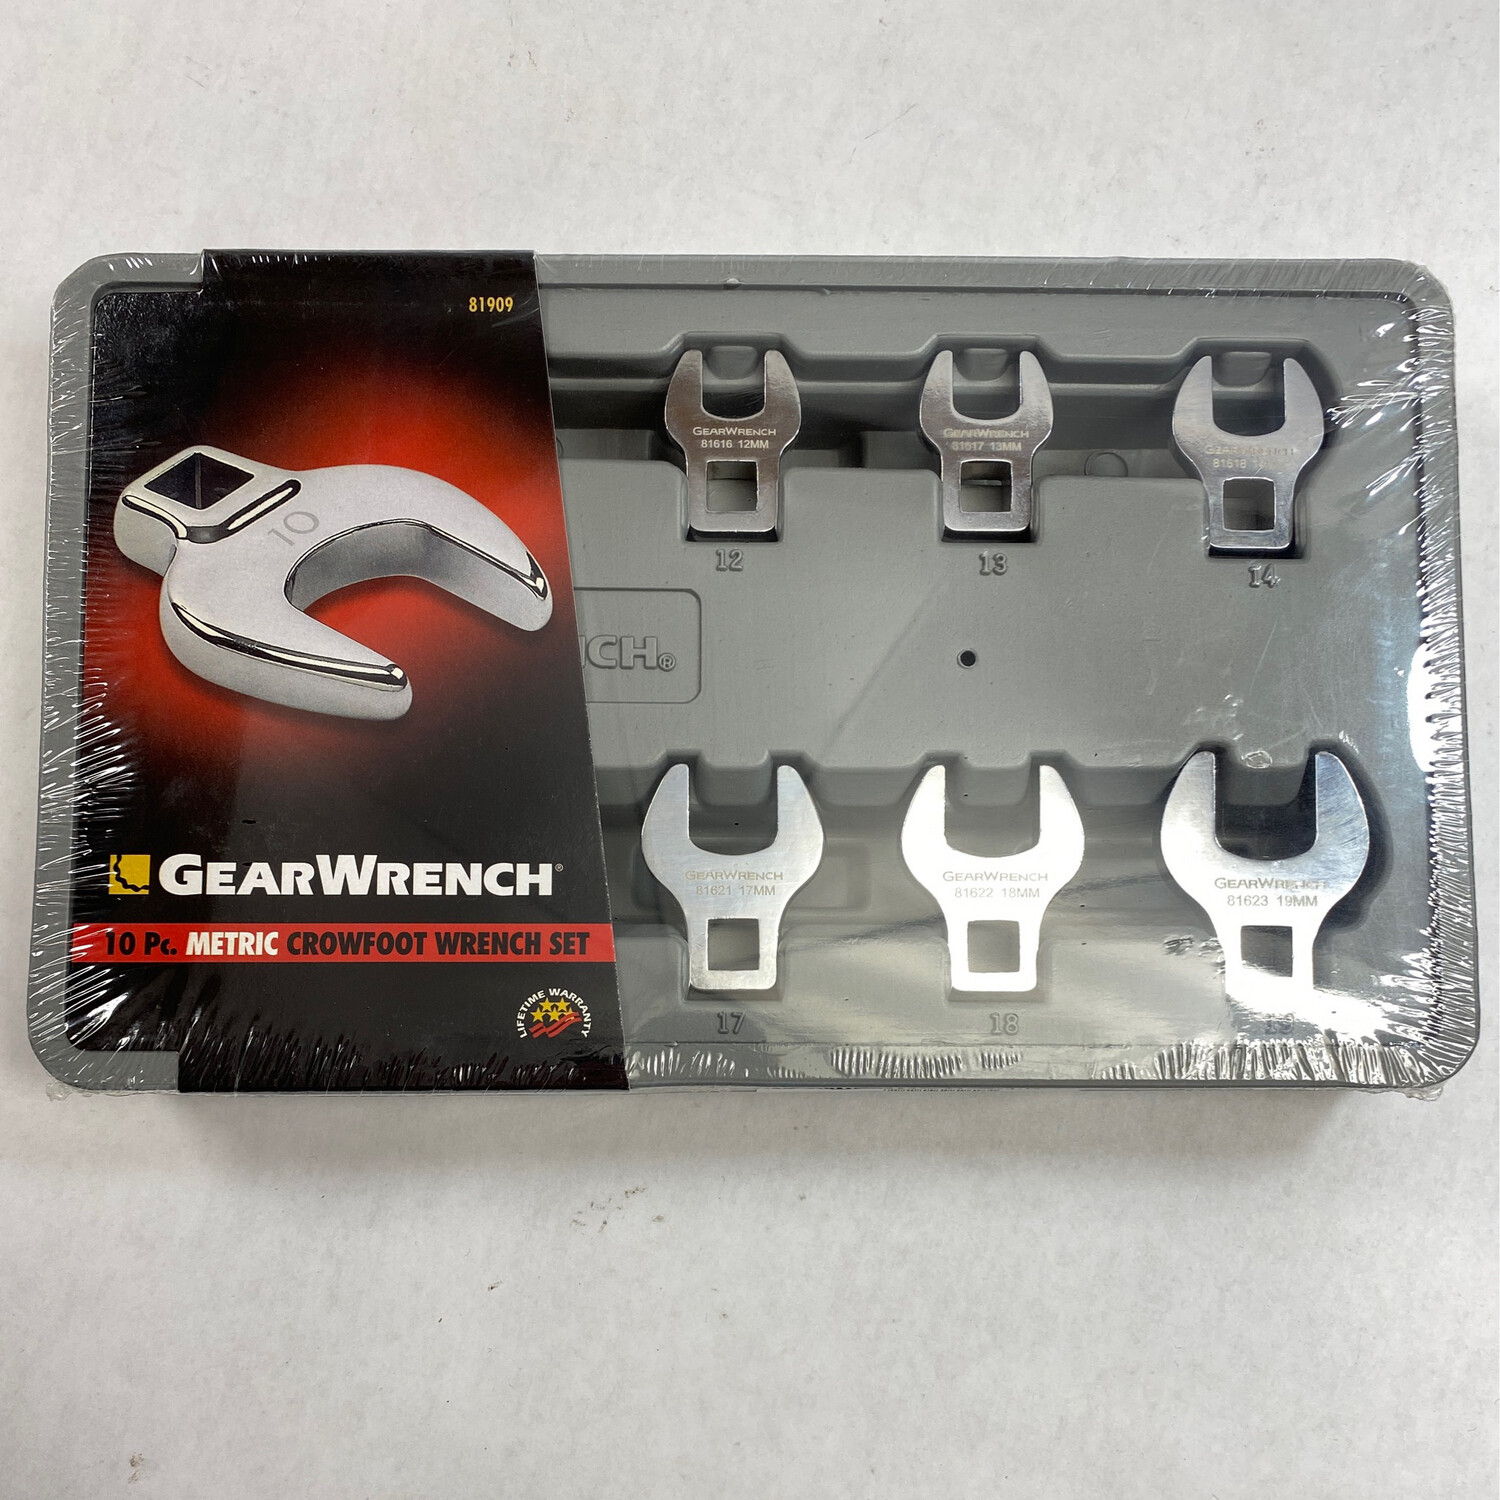 Gearwrench 10 Pc. Metric Crowfoot Wrench Set, 81909